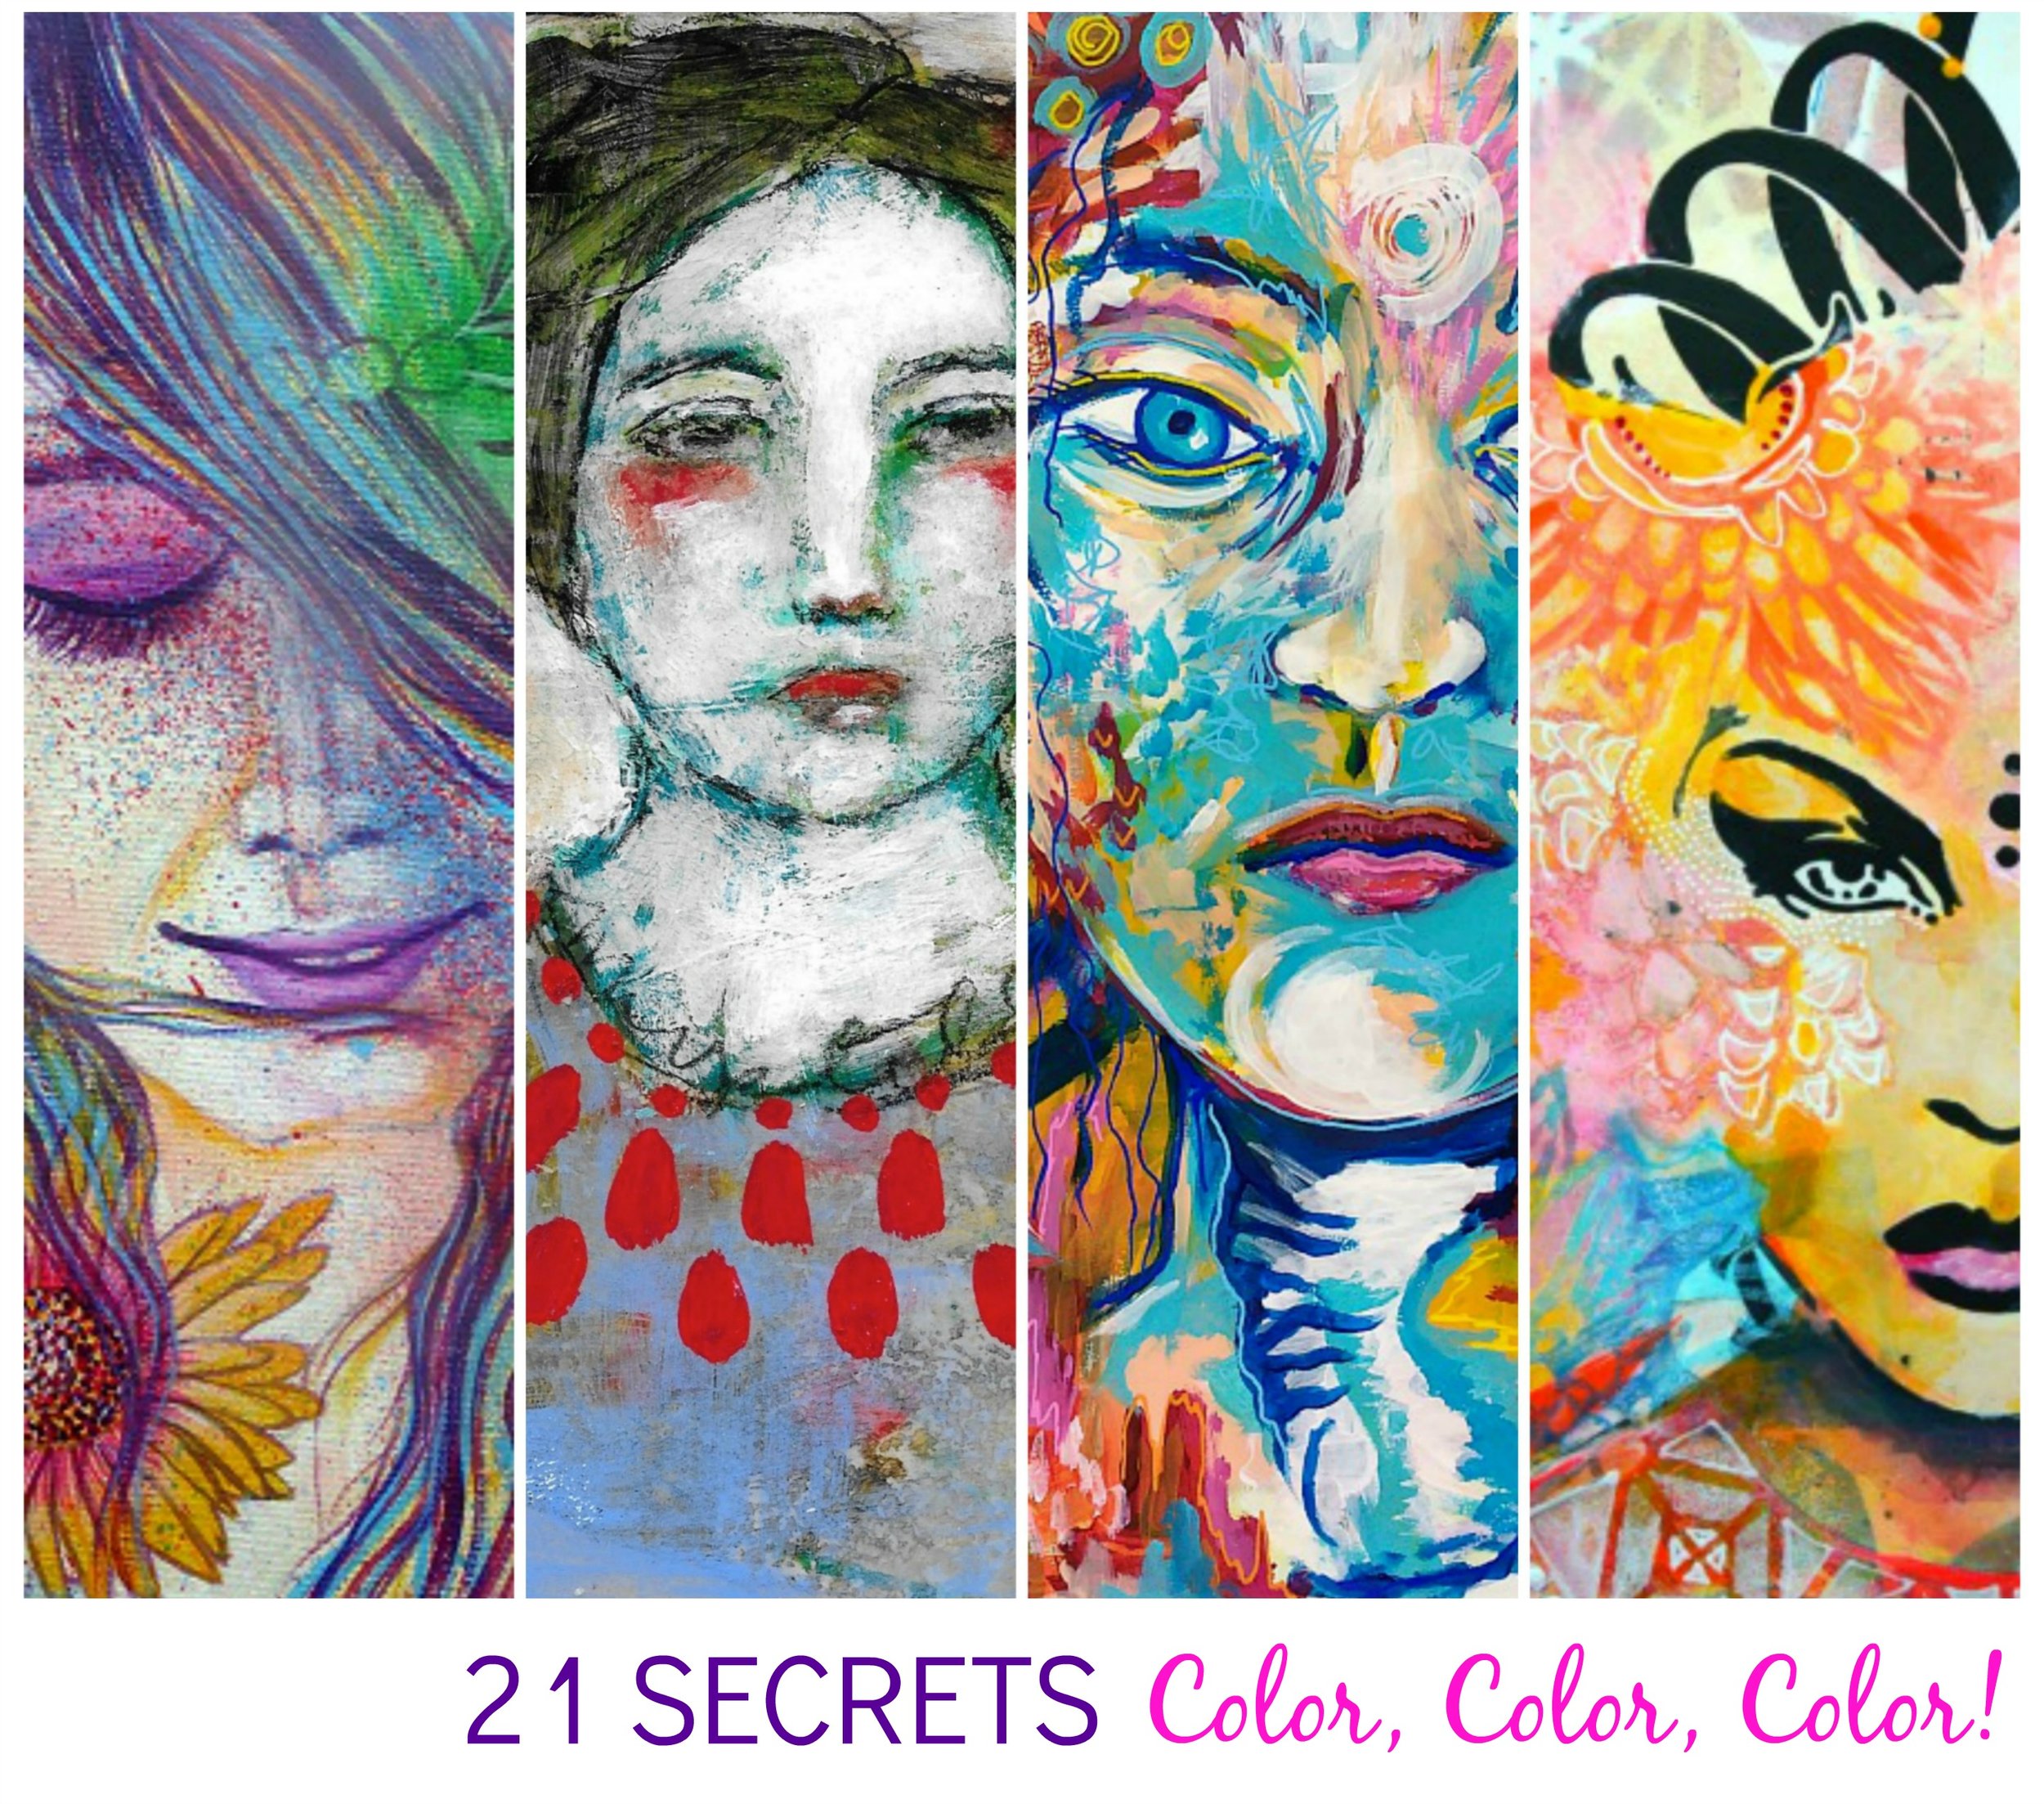 24 ways of exploring color, Color, COLOR! come art journal with us - 21 SECRETS Fall 2016 (I'm returning to teaching in this one!)